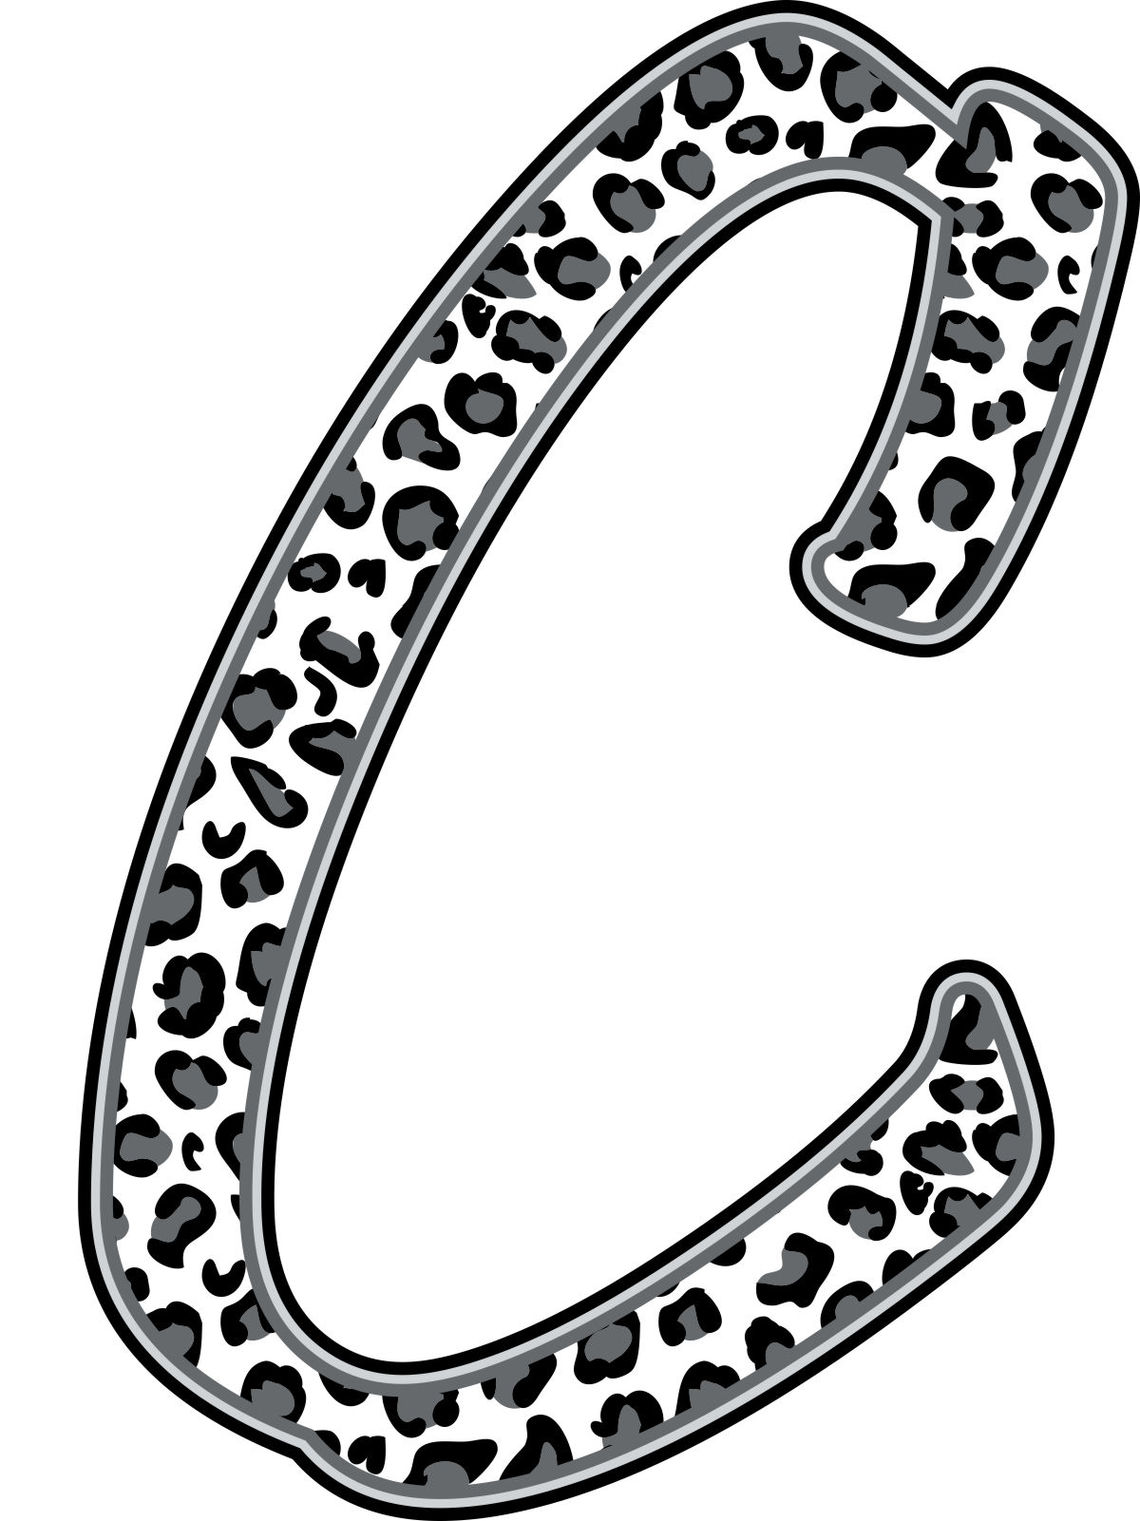 Animal Print Letters Printable Clipart - Free to use Clip Art Resource